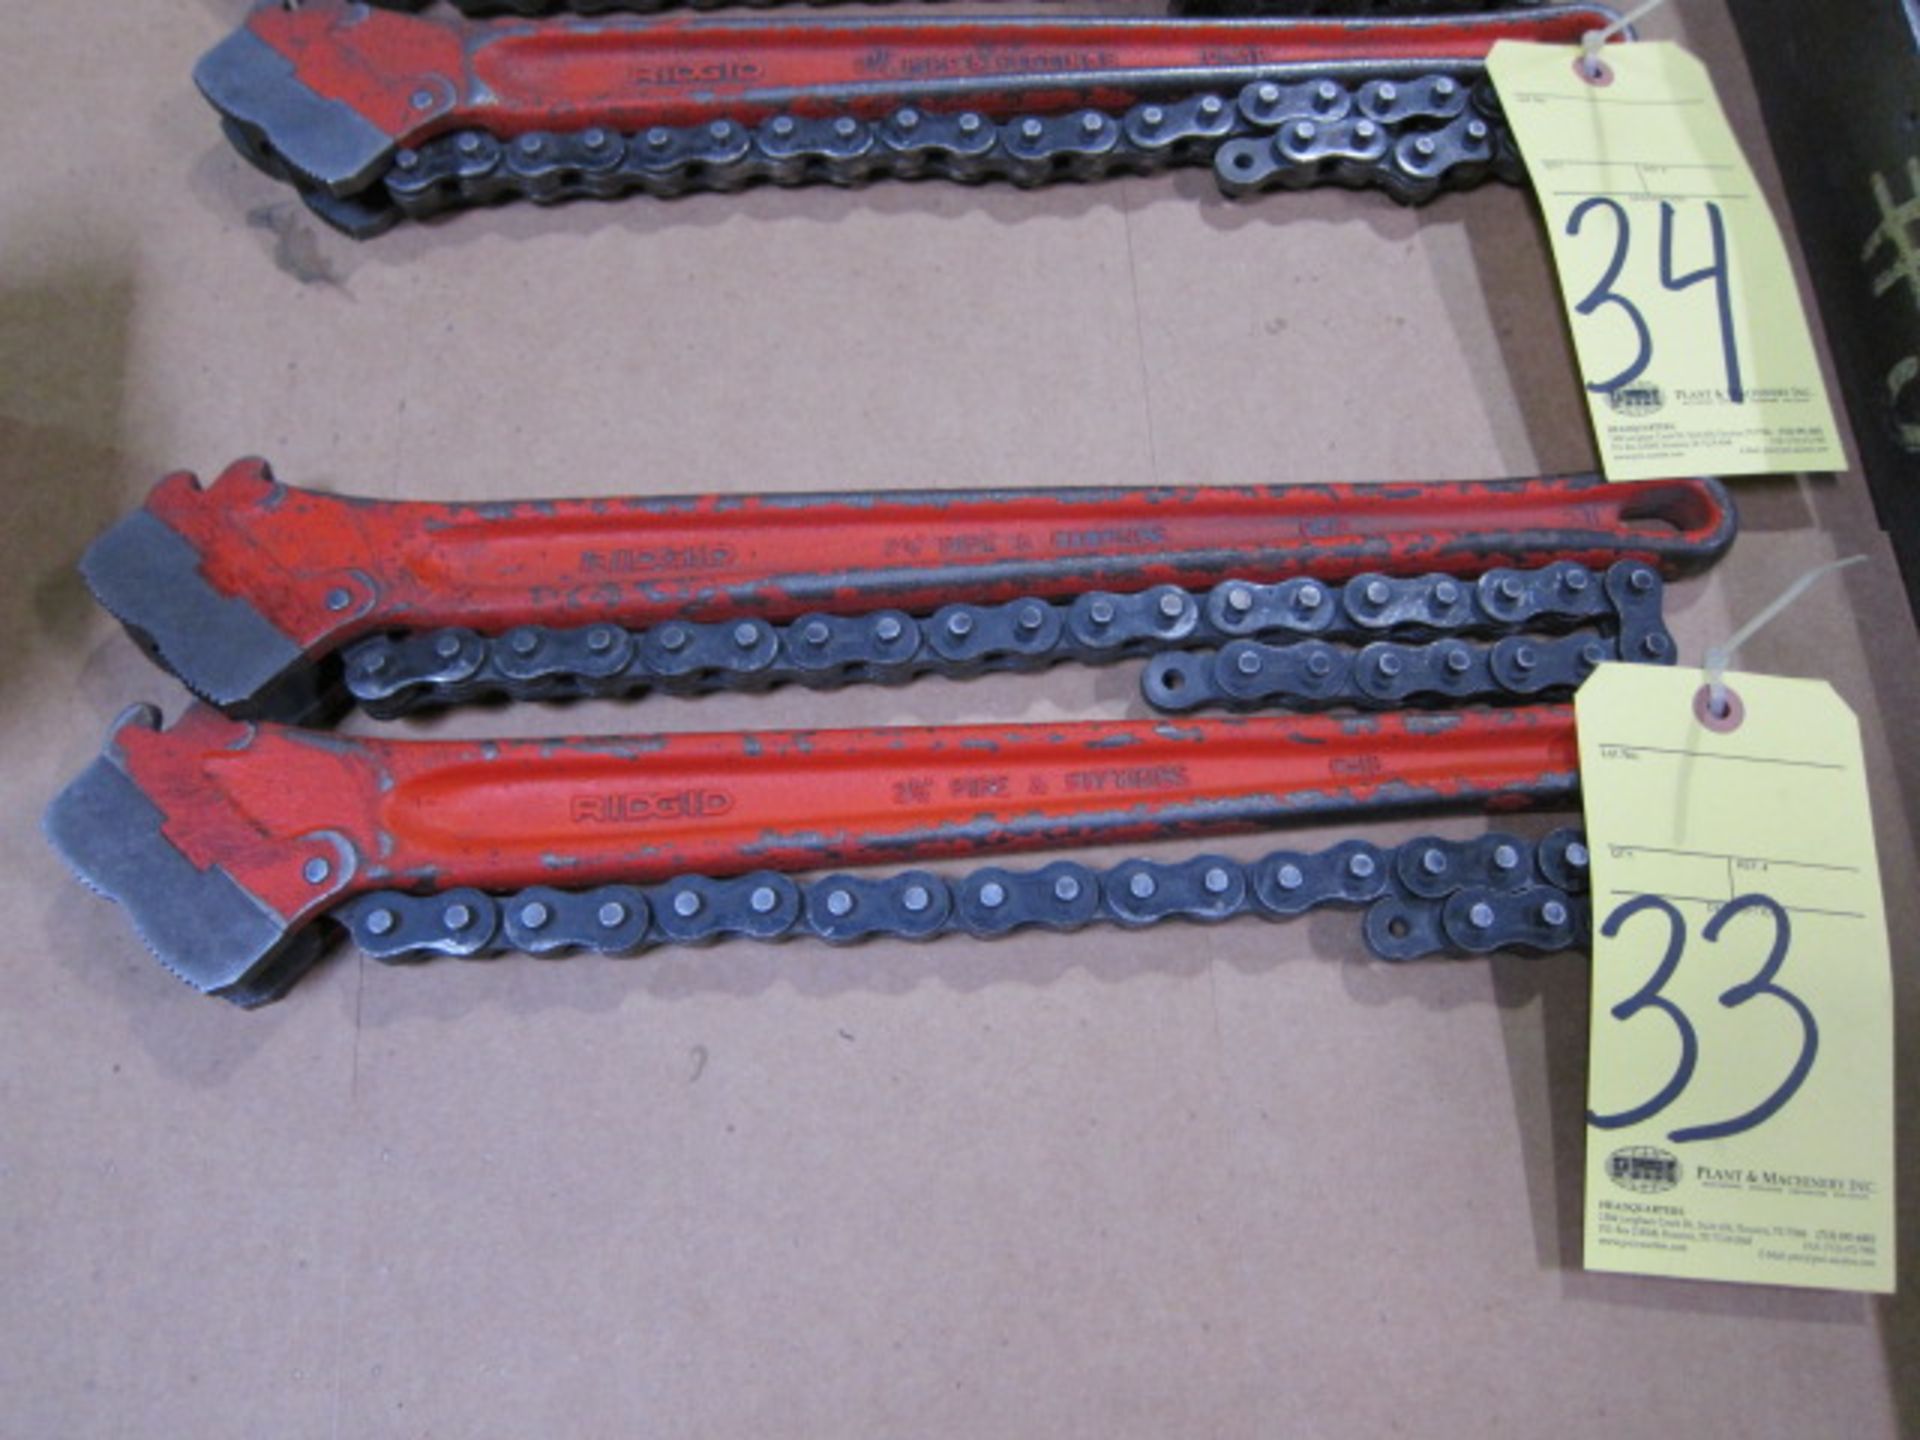 LOT OF CHAIN TYPE PIPE WRENCHES (2), RIDGID 18"